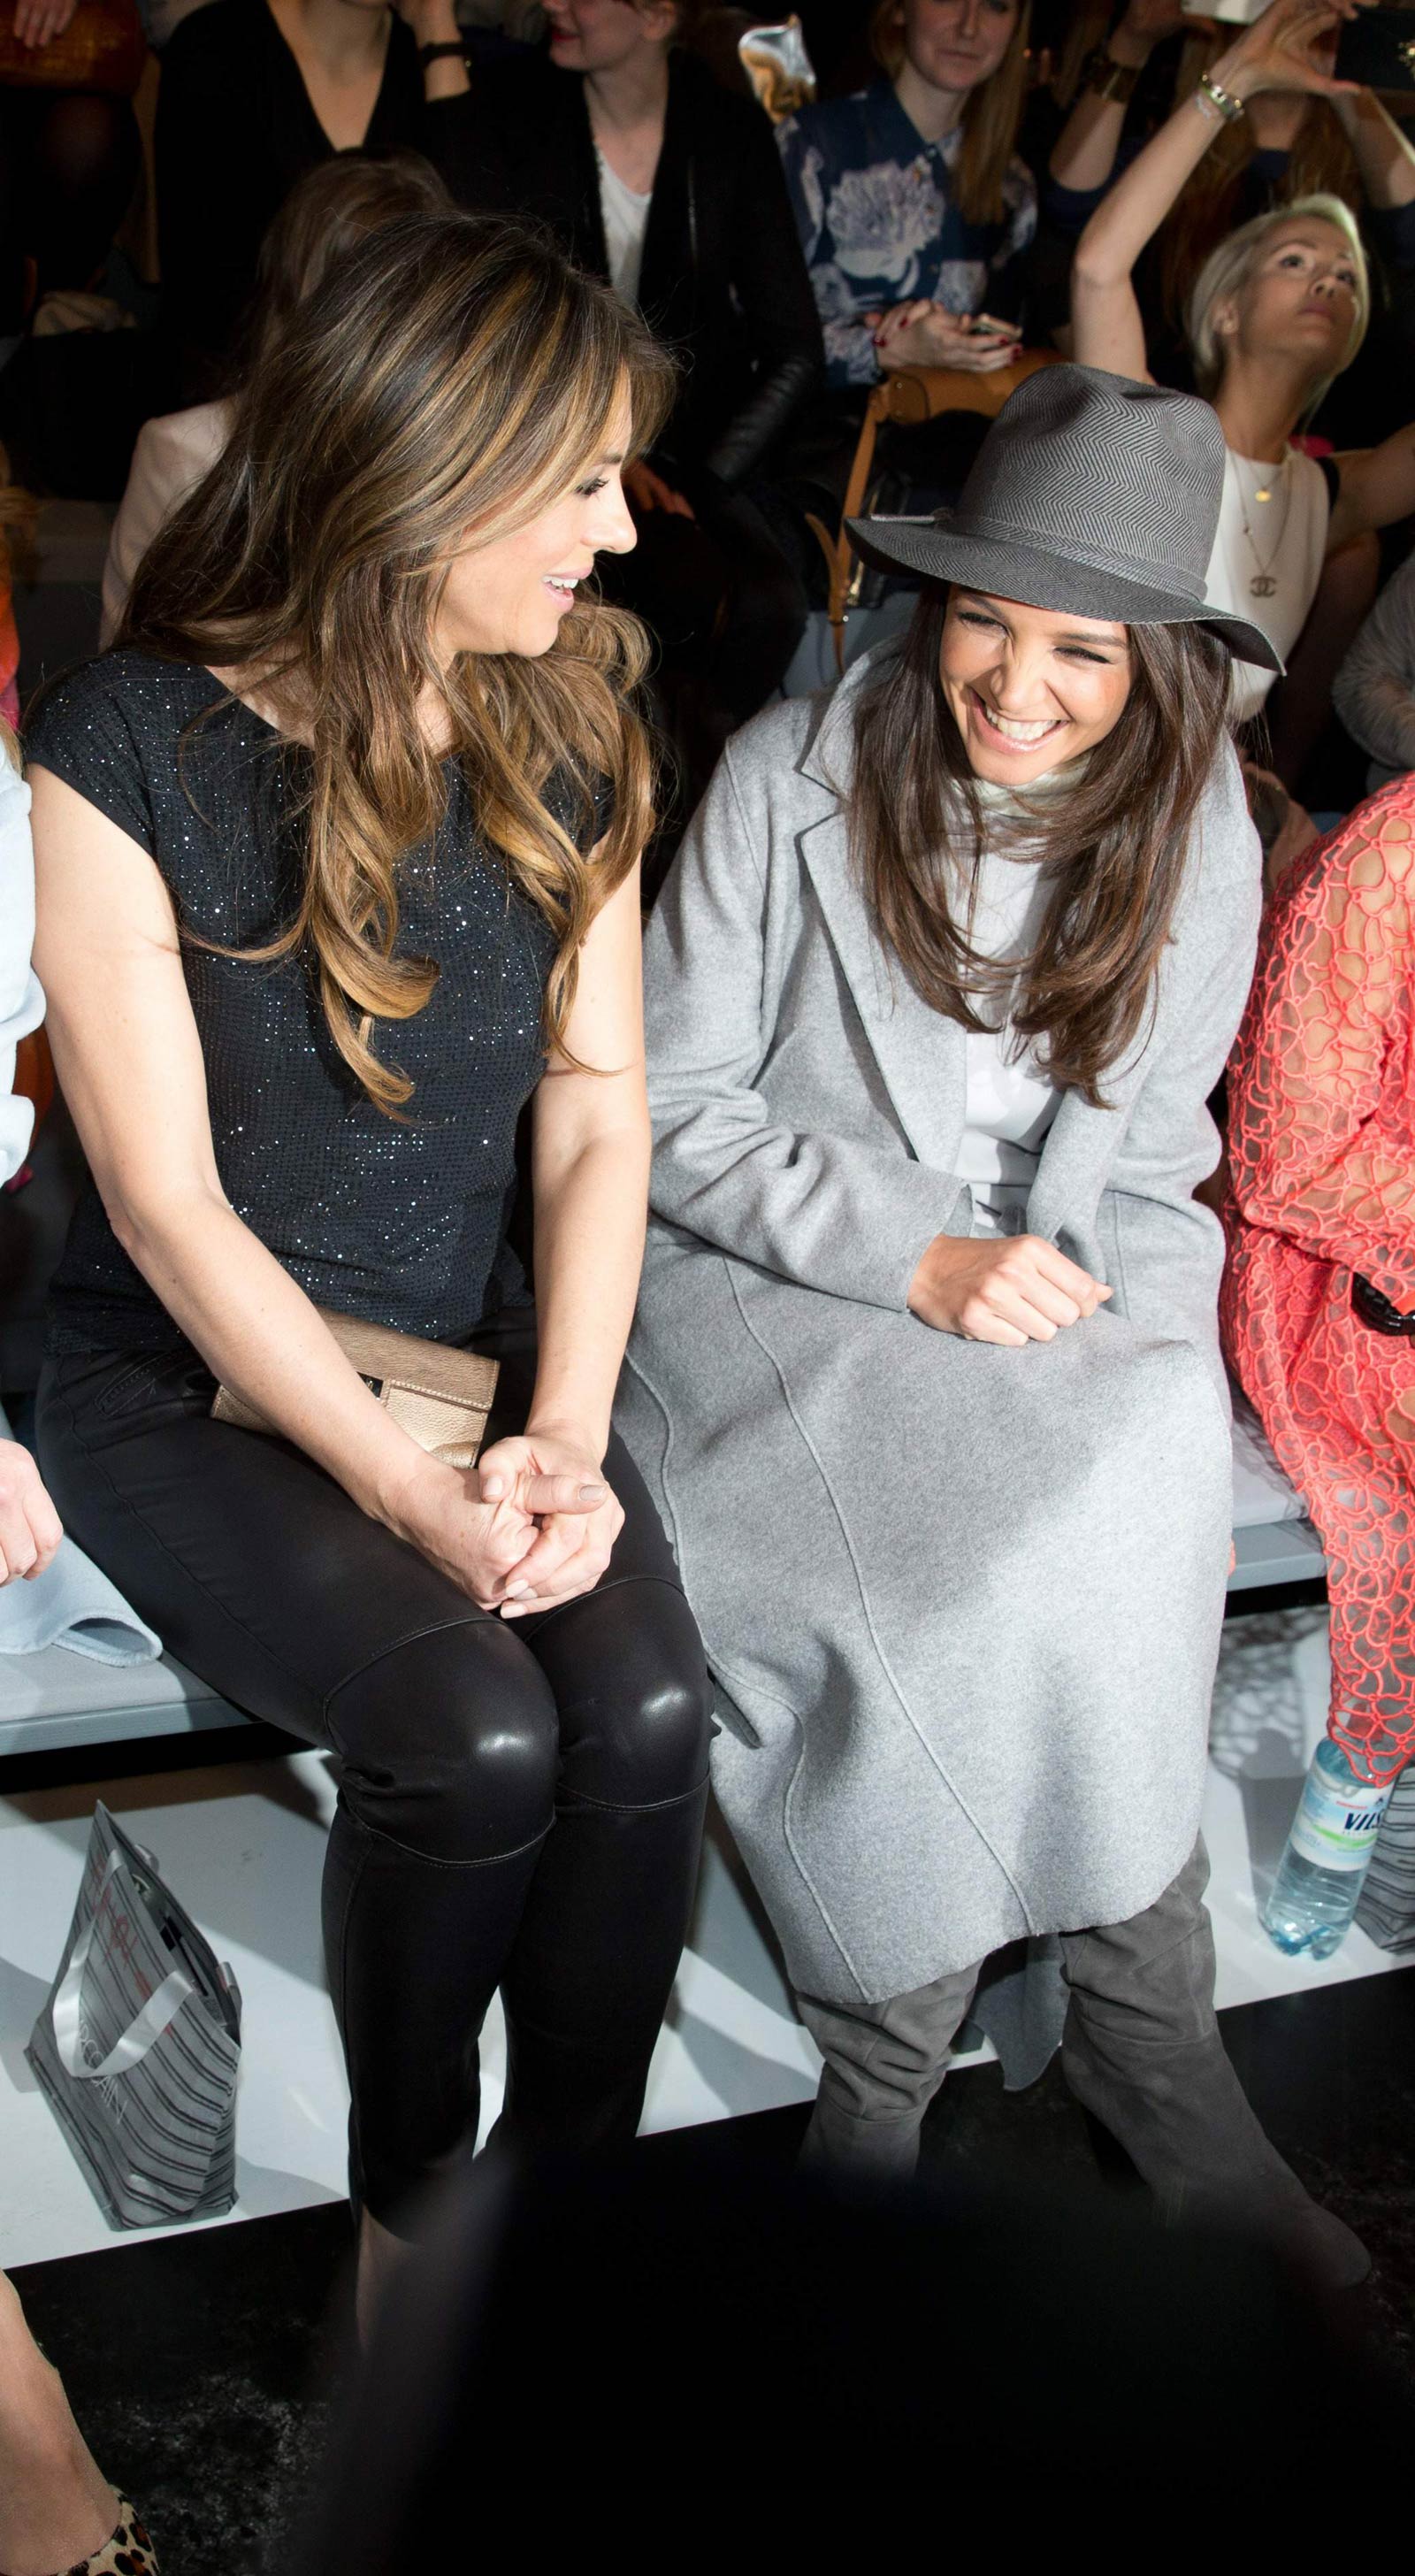 Elizabeth Hurley attends the Marc Cain show at the Mercedes-Benz Fashion Week